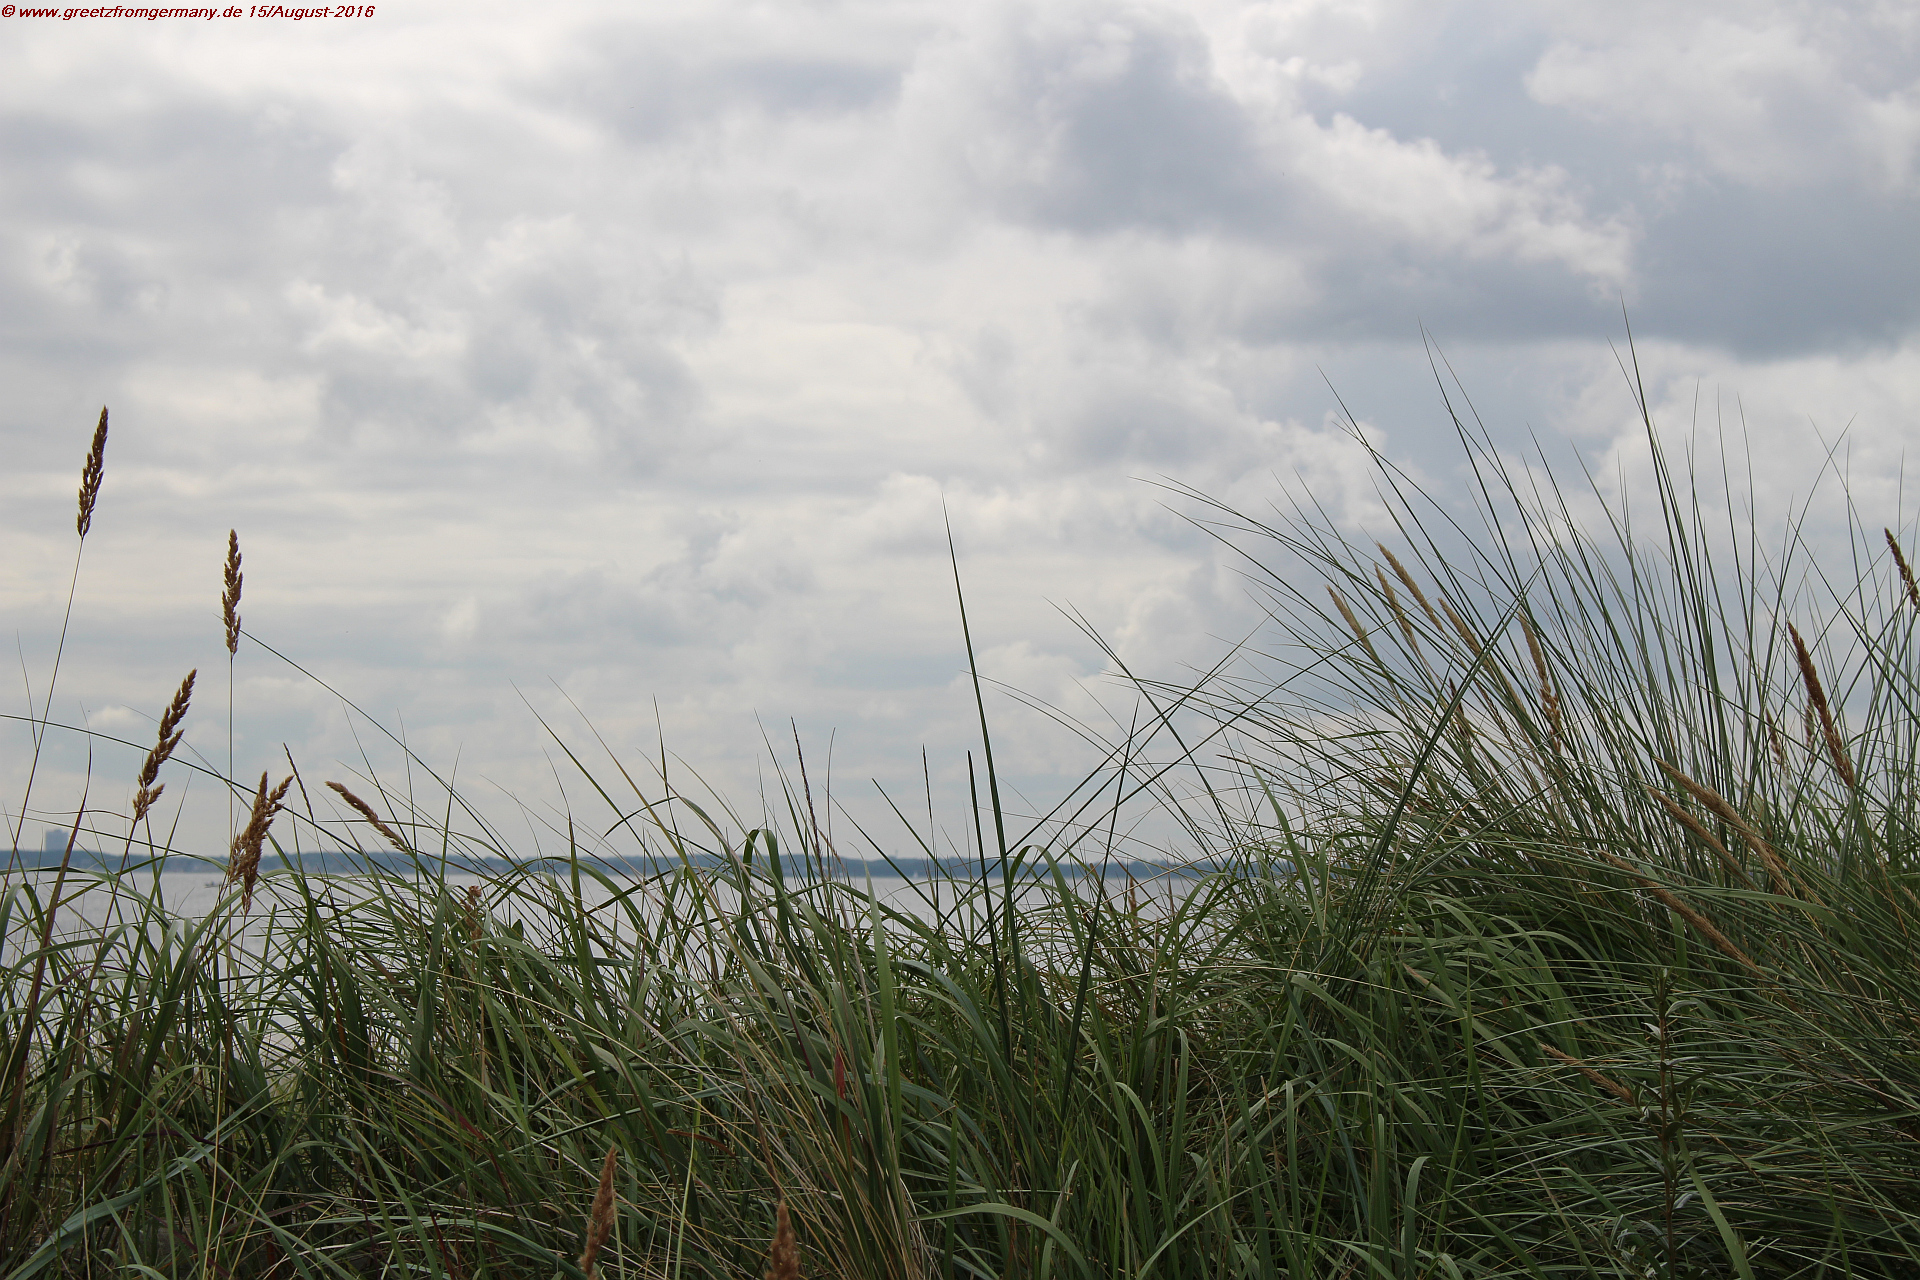 Beach grass, sand, water and clouds - the view opens wide unto the Baltic Sea at the beaches of little villages like Scharbeutz